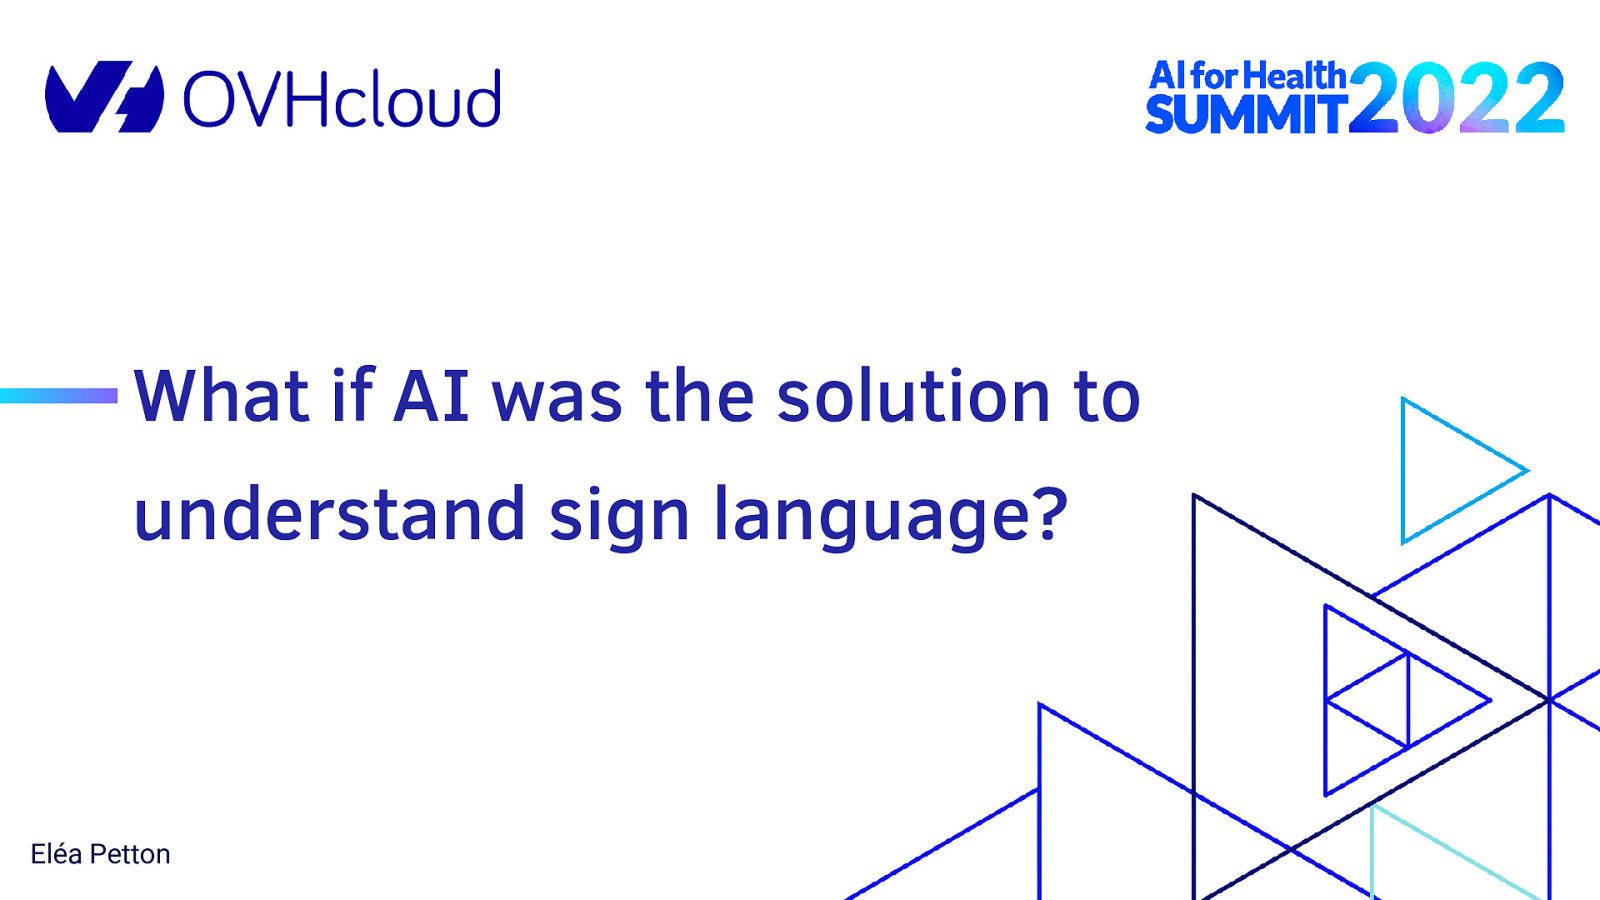 What if AI was the solution to understand sign language?